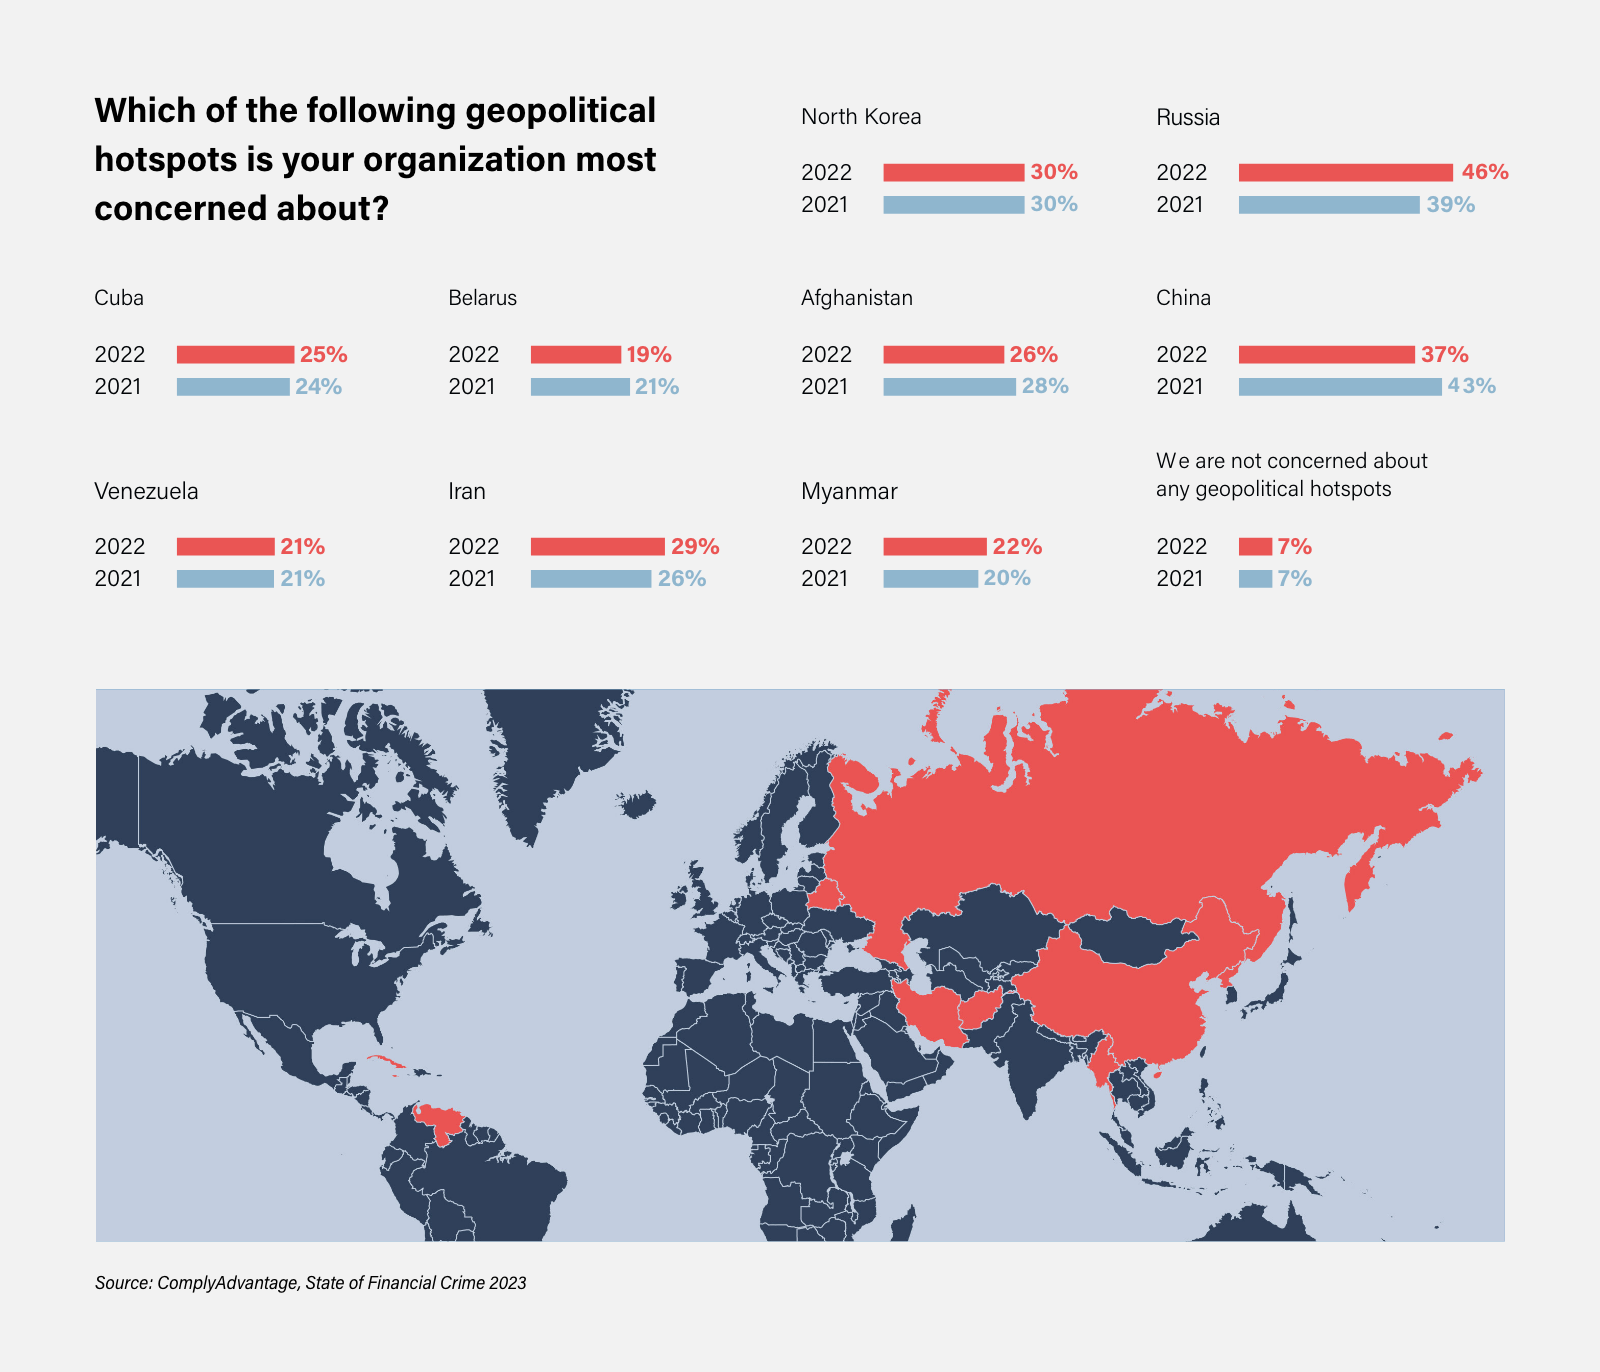 Survey results: Which of the following geopolitical hotspots is your organization the most concerned about?